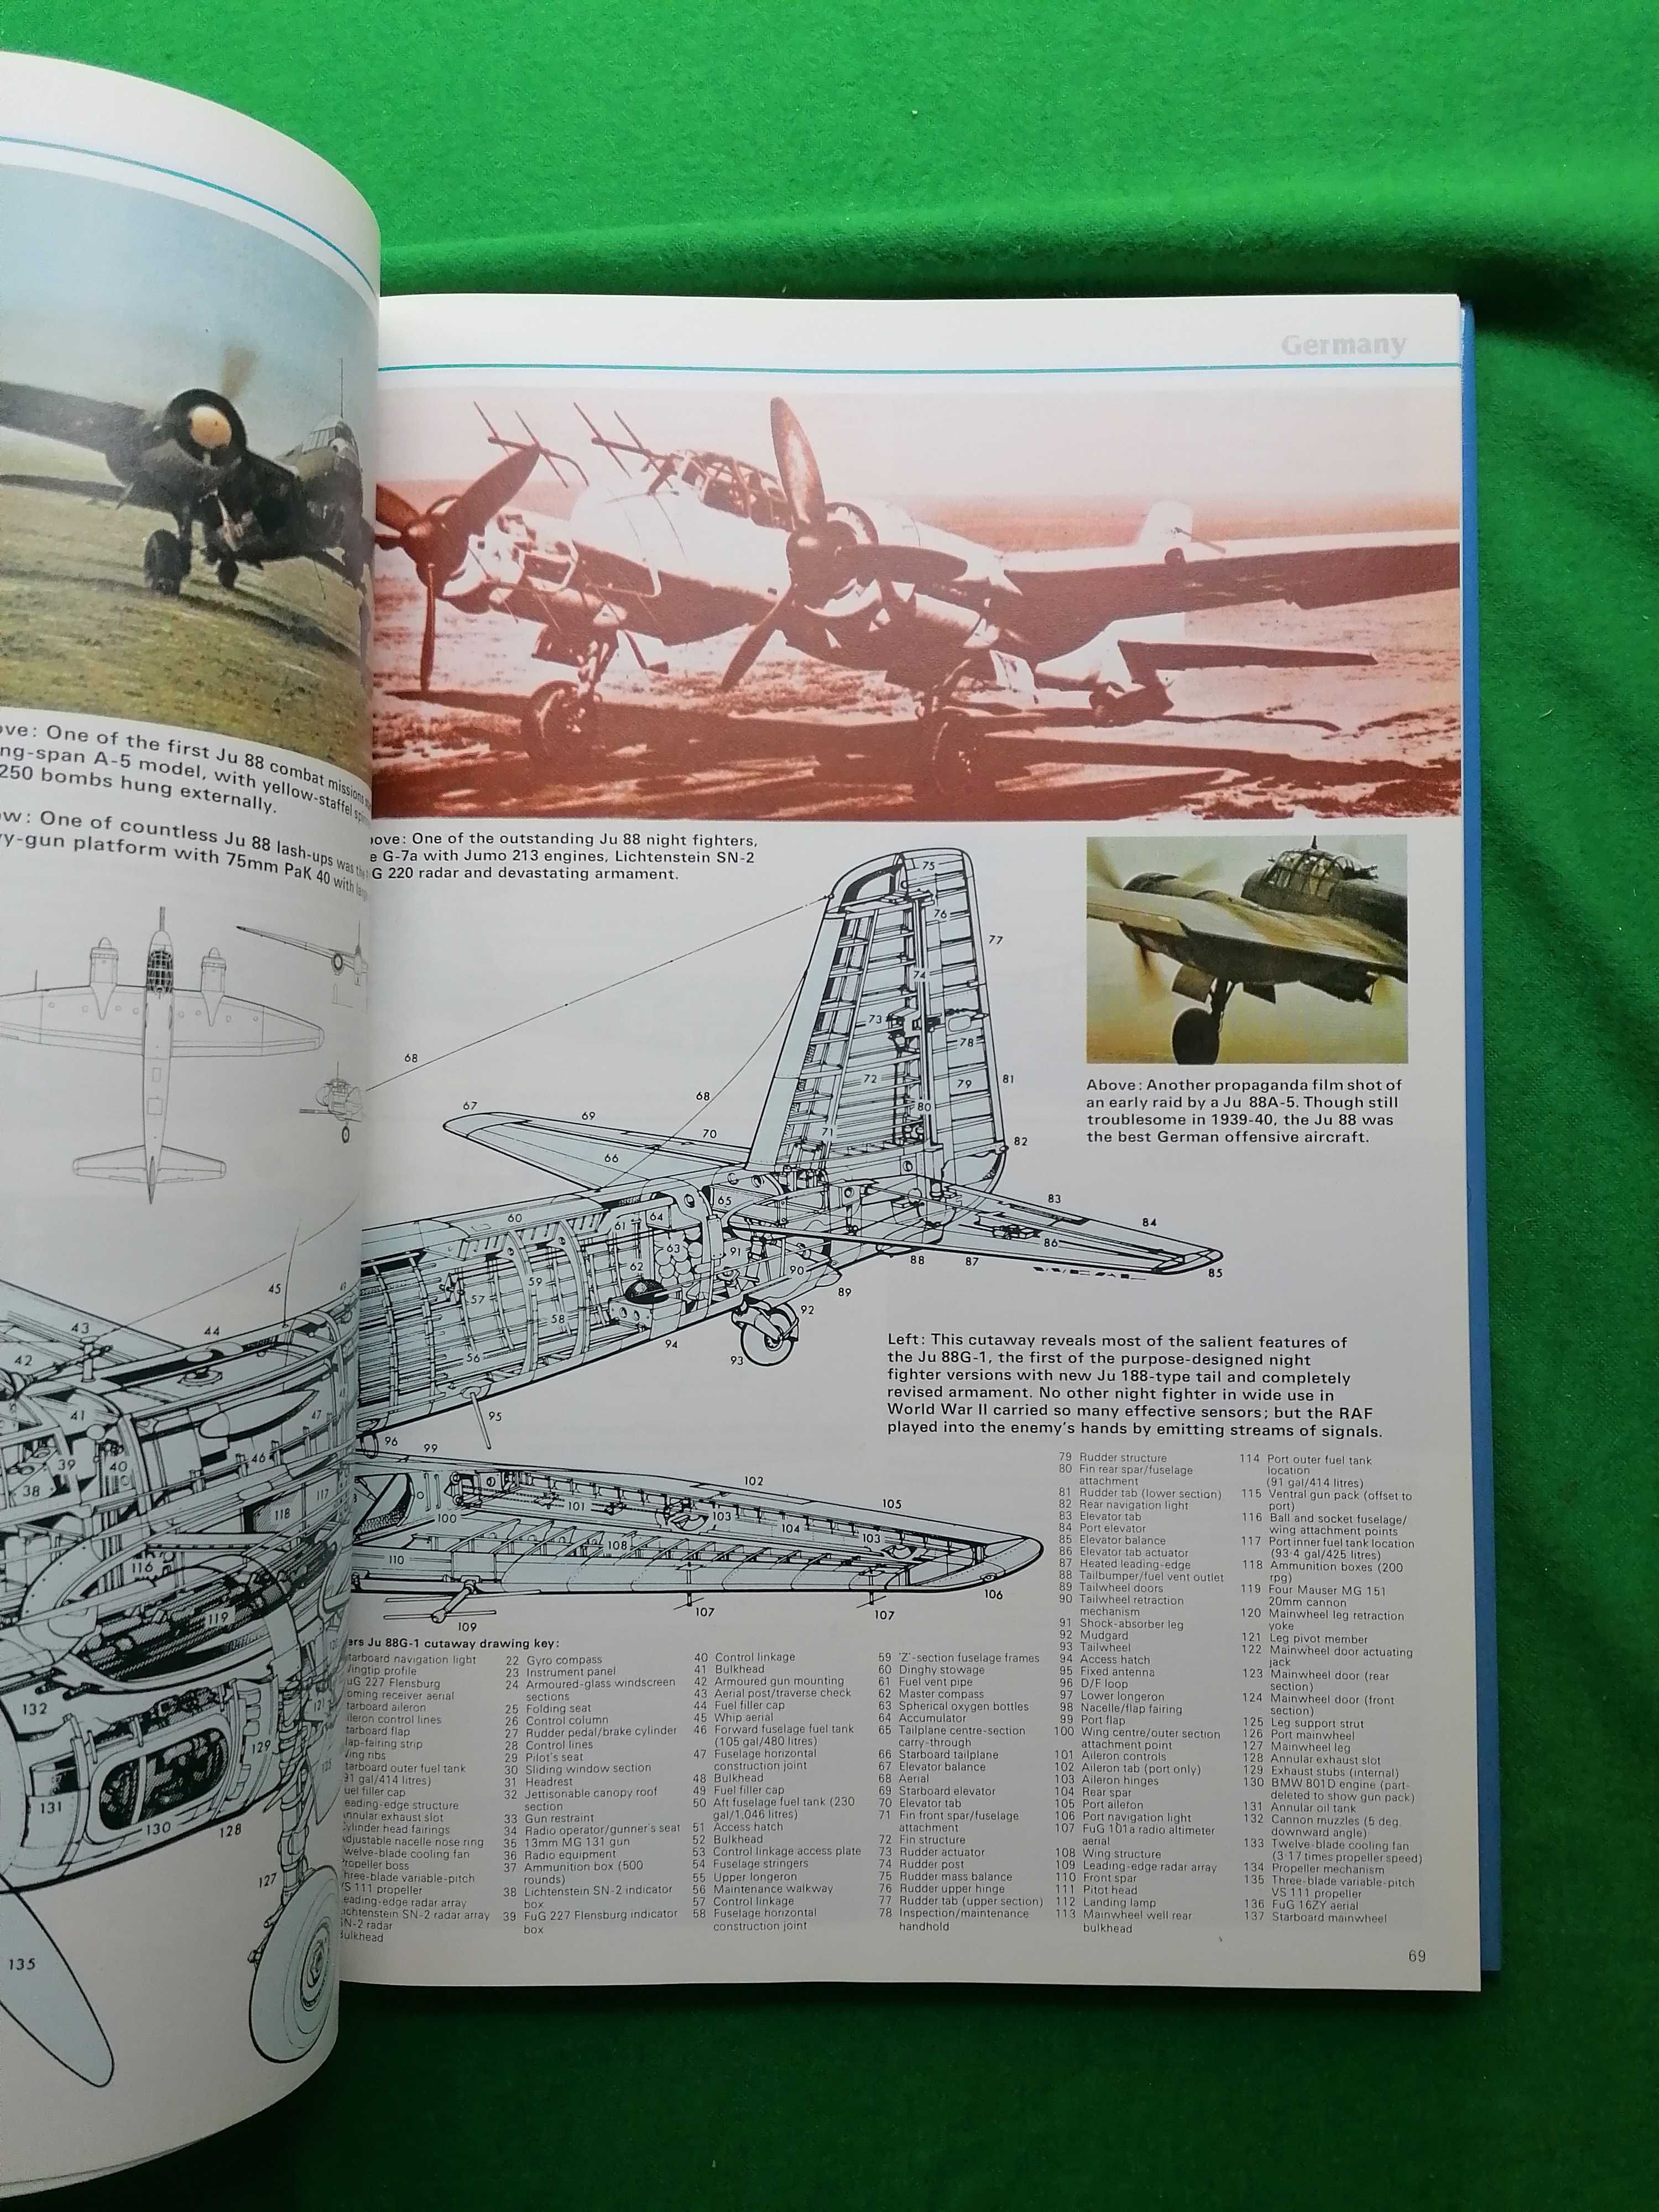 The Illustrated Encyclopedia of Combat Aircraft of World War II